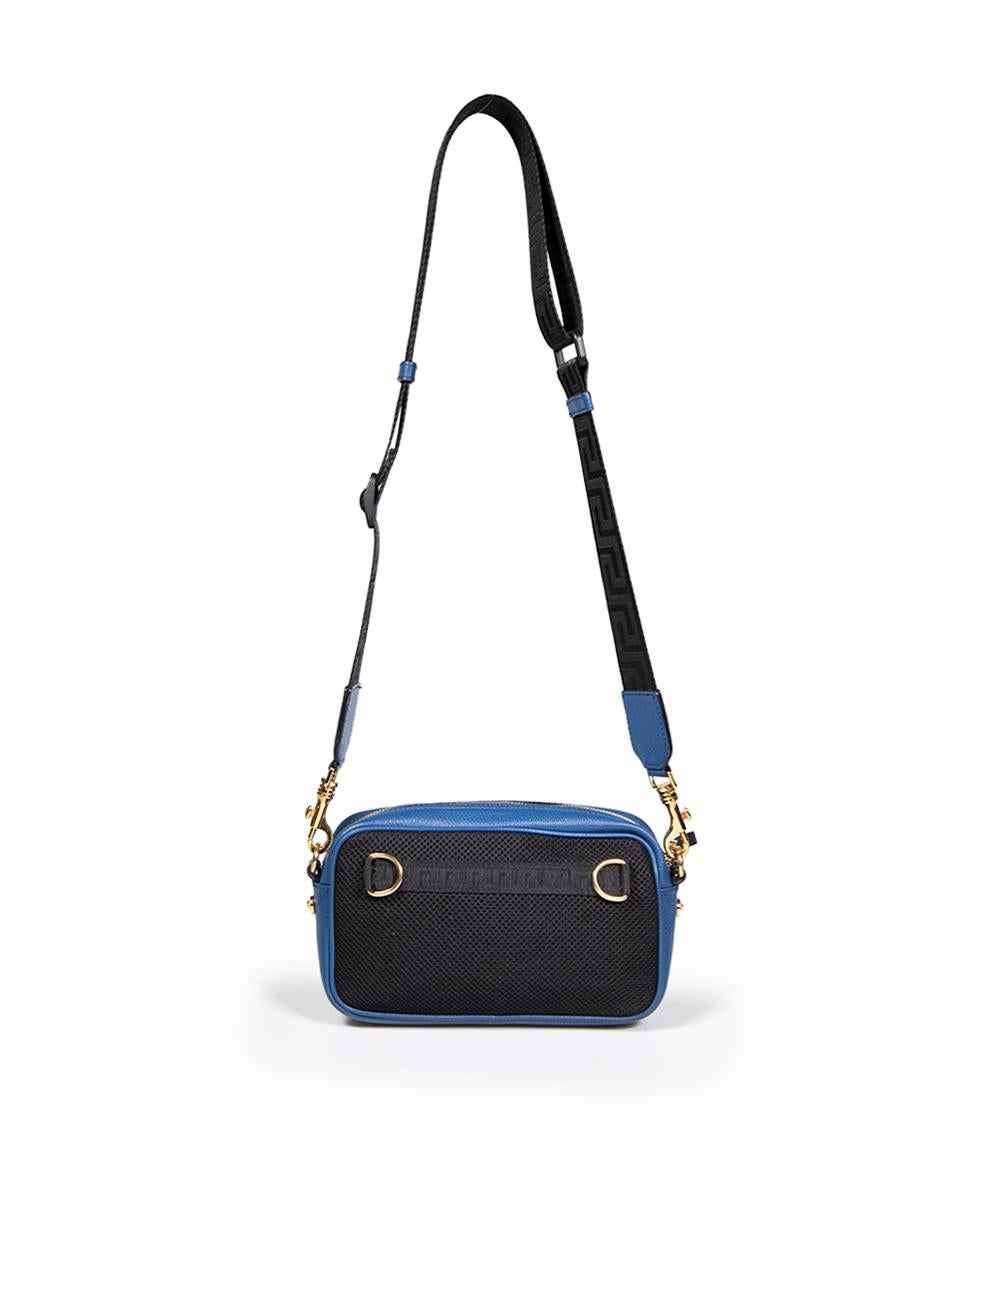 Versace Blue Leather Grained Crossbody Bag In Good Condition For Sale In London, GB